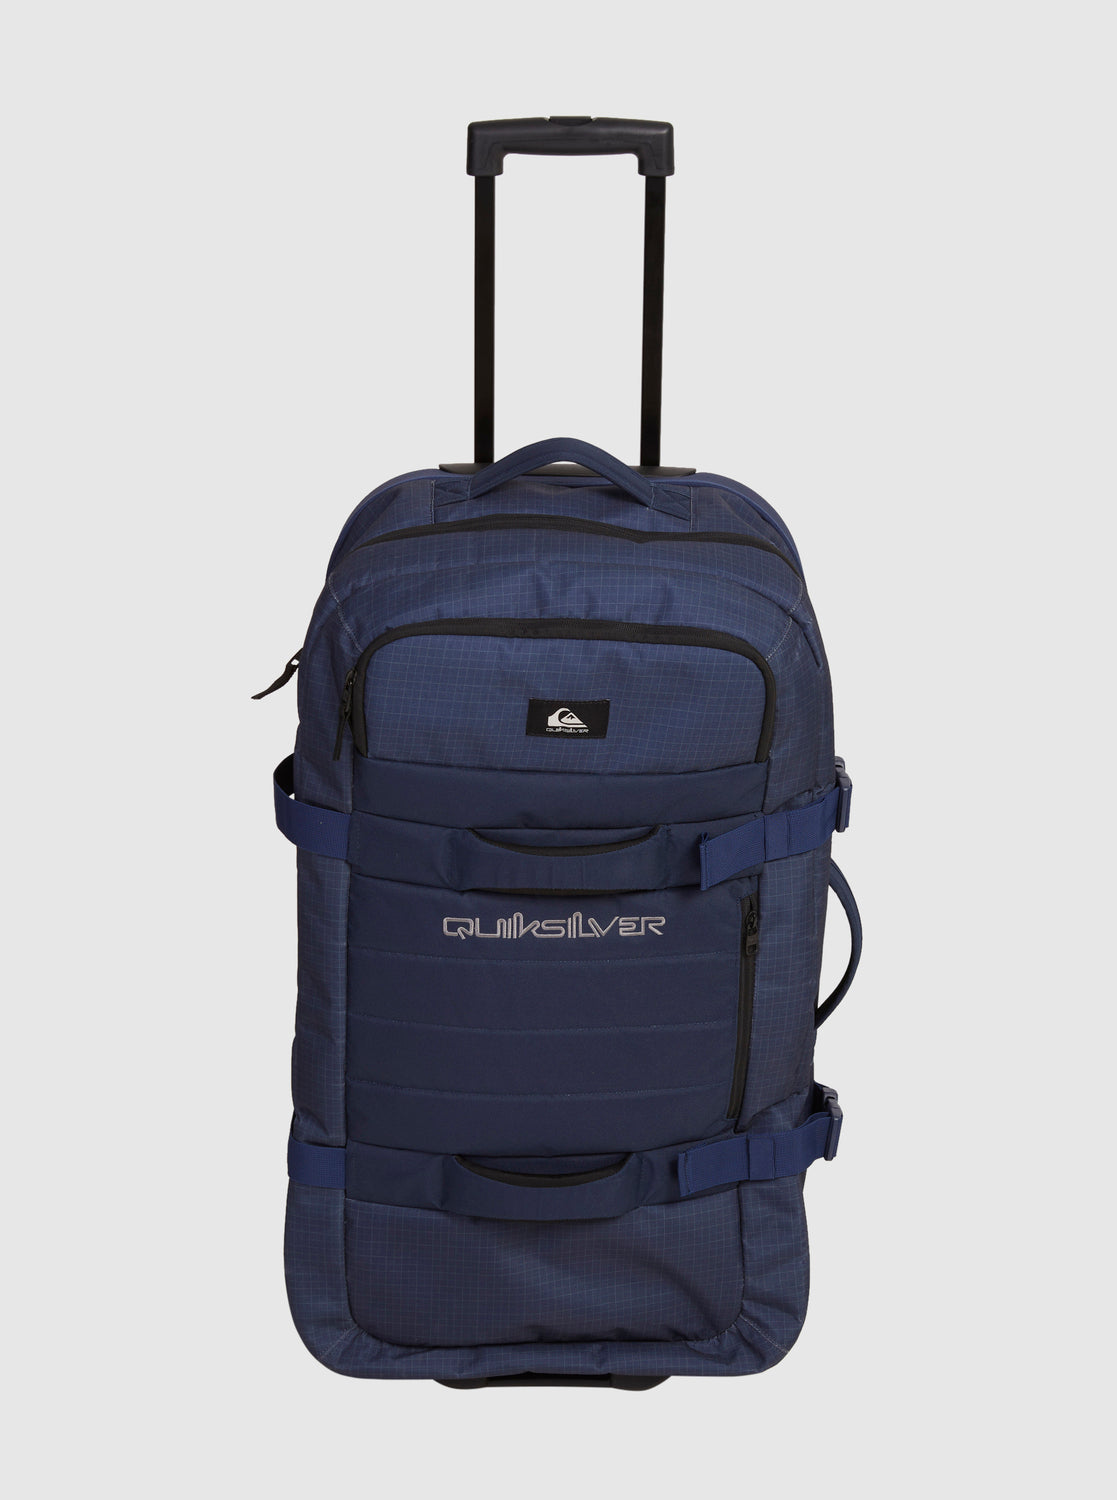 Quiksilver New Reach 100L Travel Bag naval academy colour standing with telescopic handle outstretched